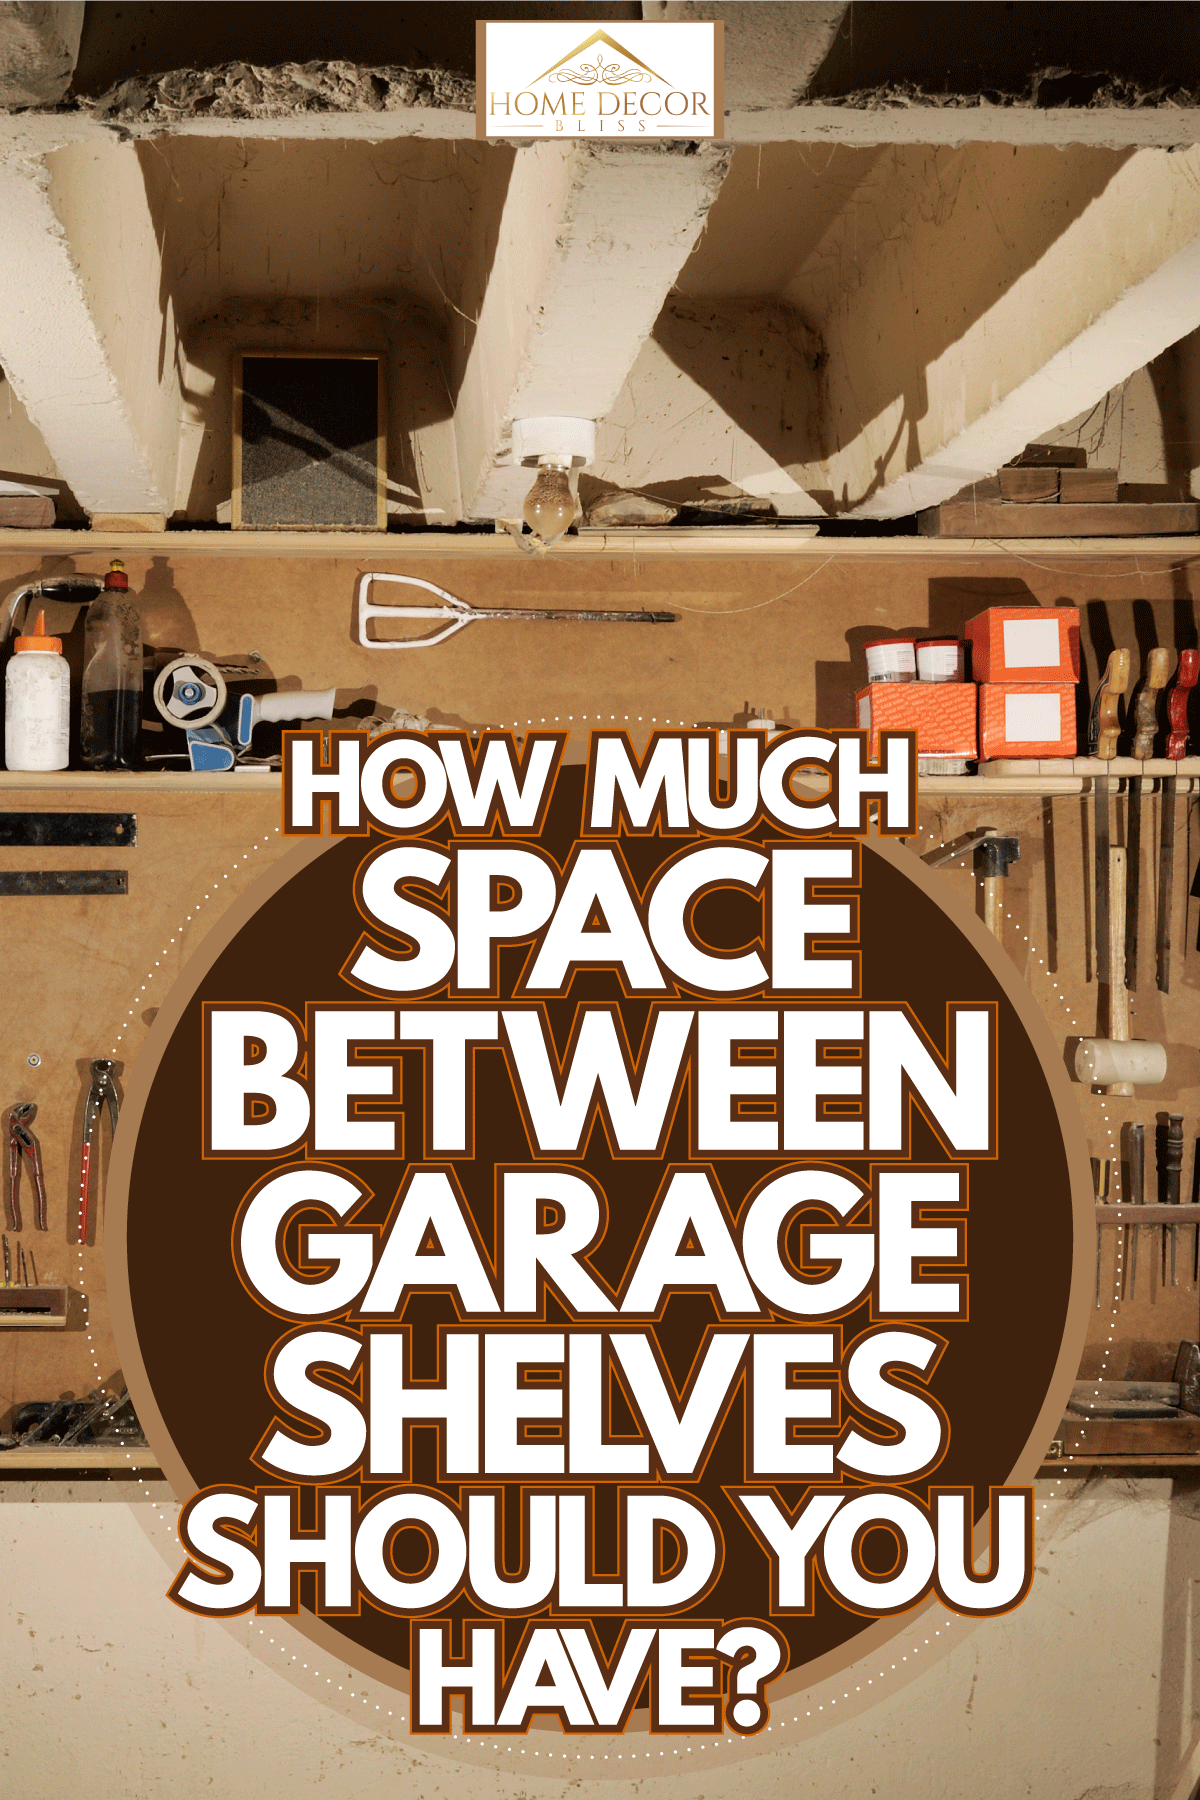 Interior of a garage with tools hanged on a board, How Much Space Between Garage Shelves Should You Have?